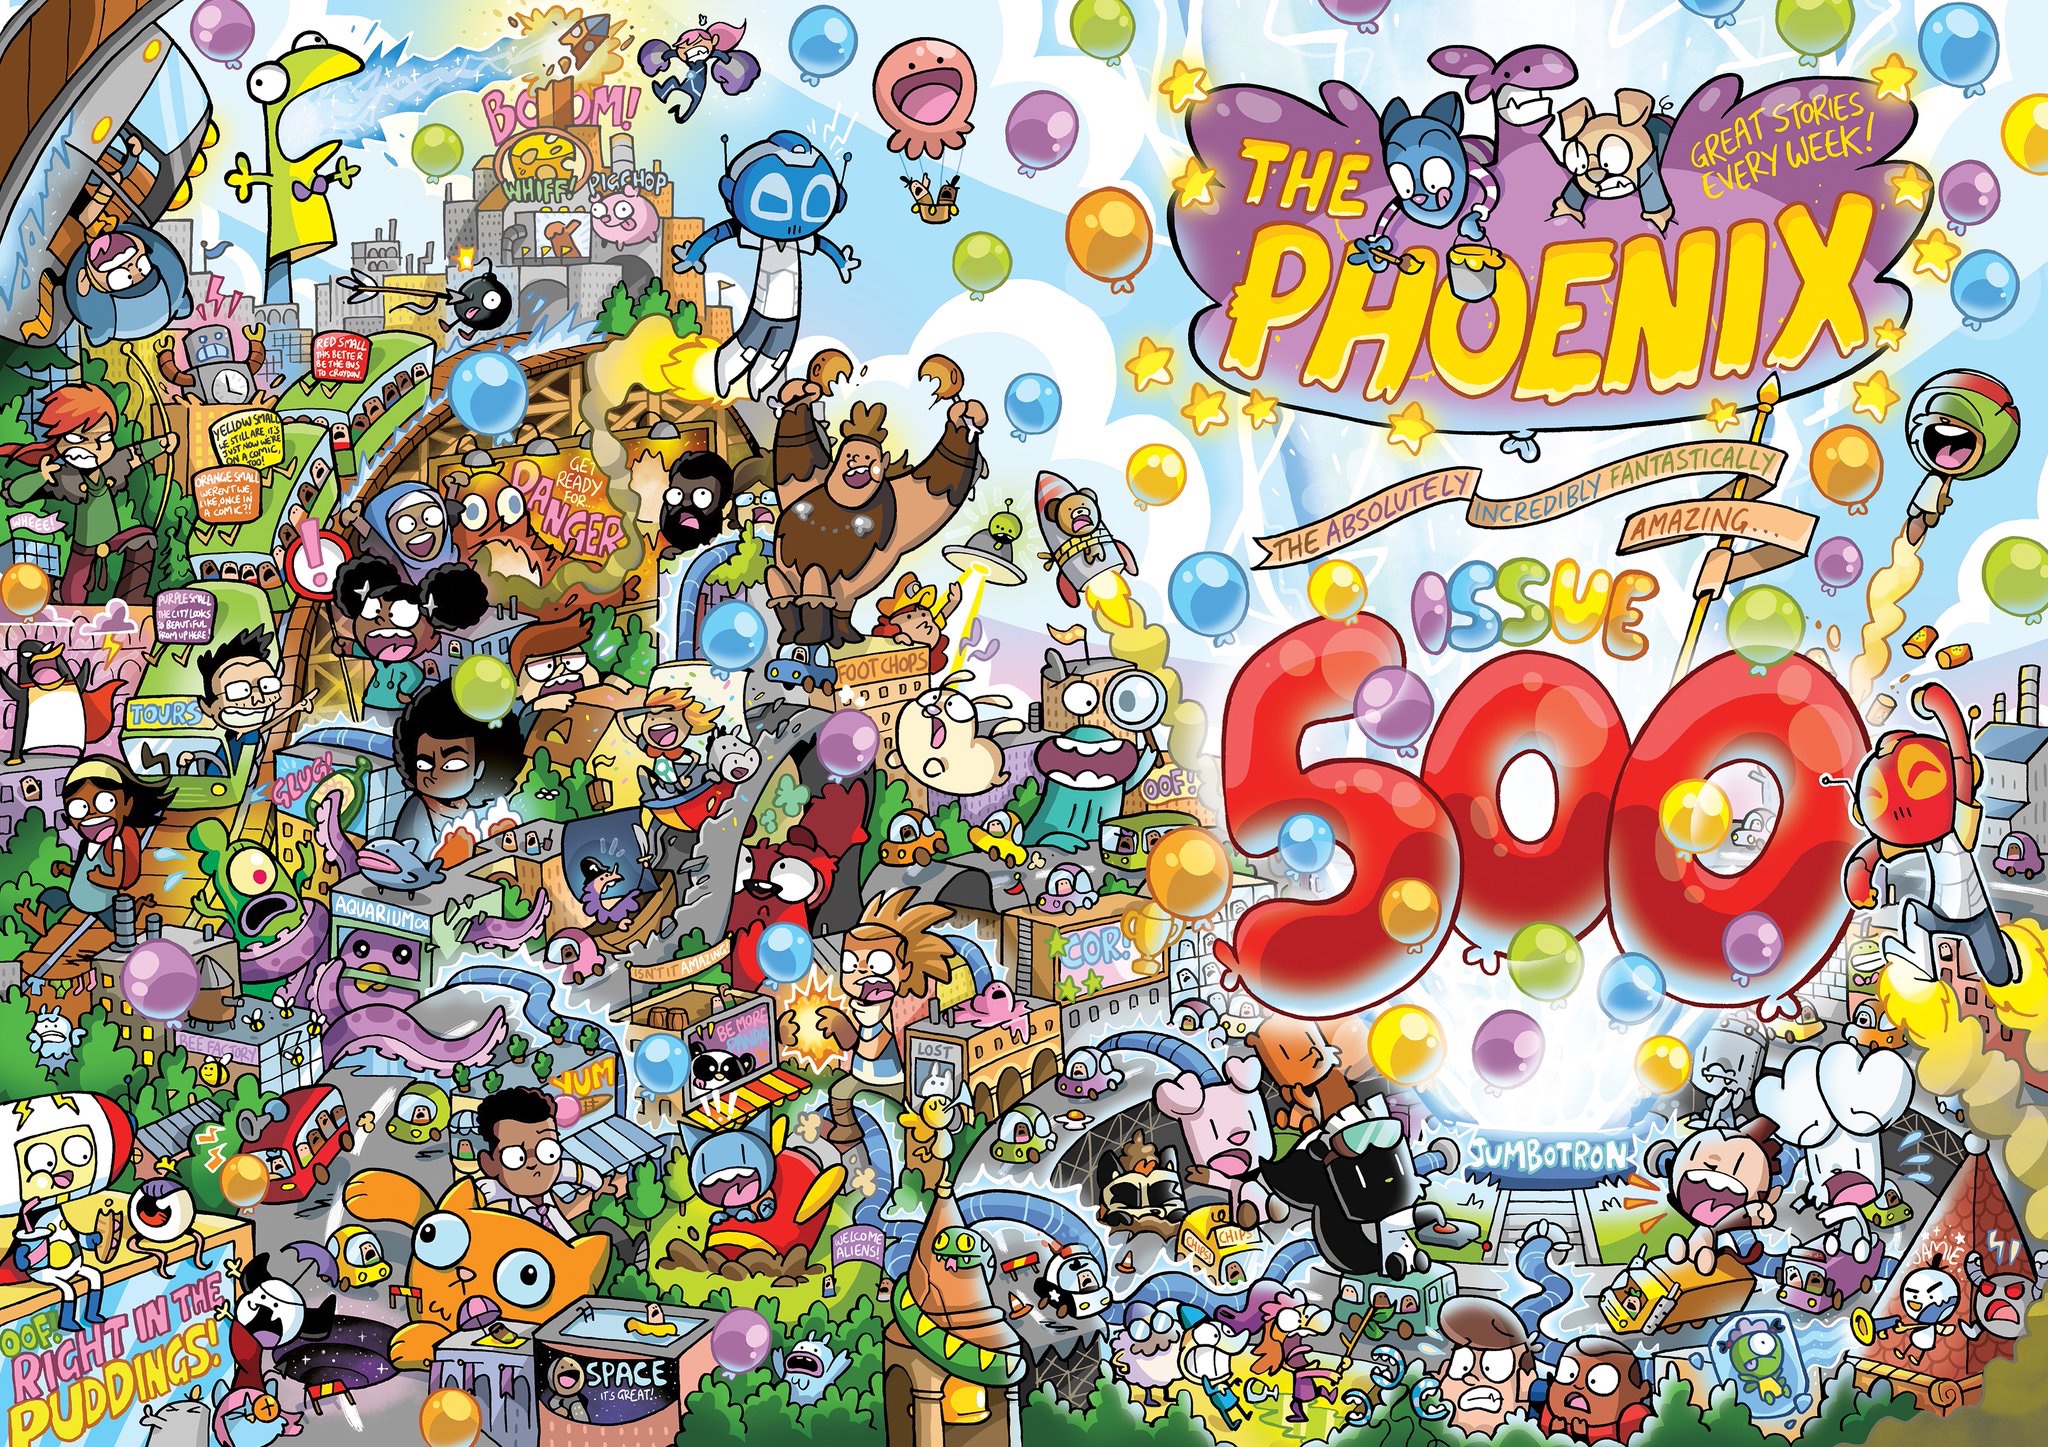 The fantastic wraparound cover to The Phoenix Issue 500, by Jamie Smart